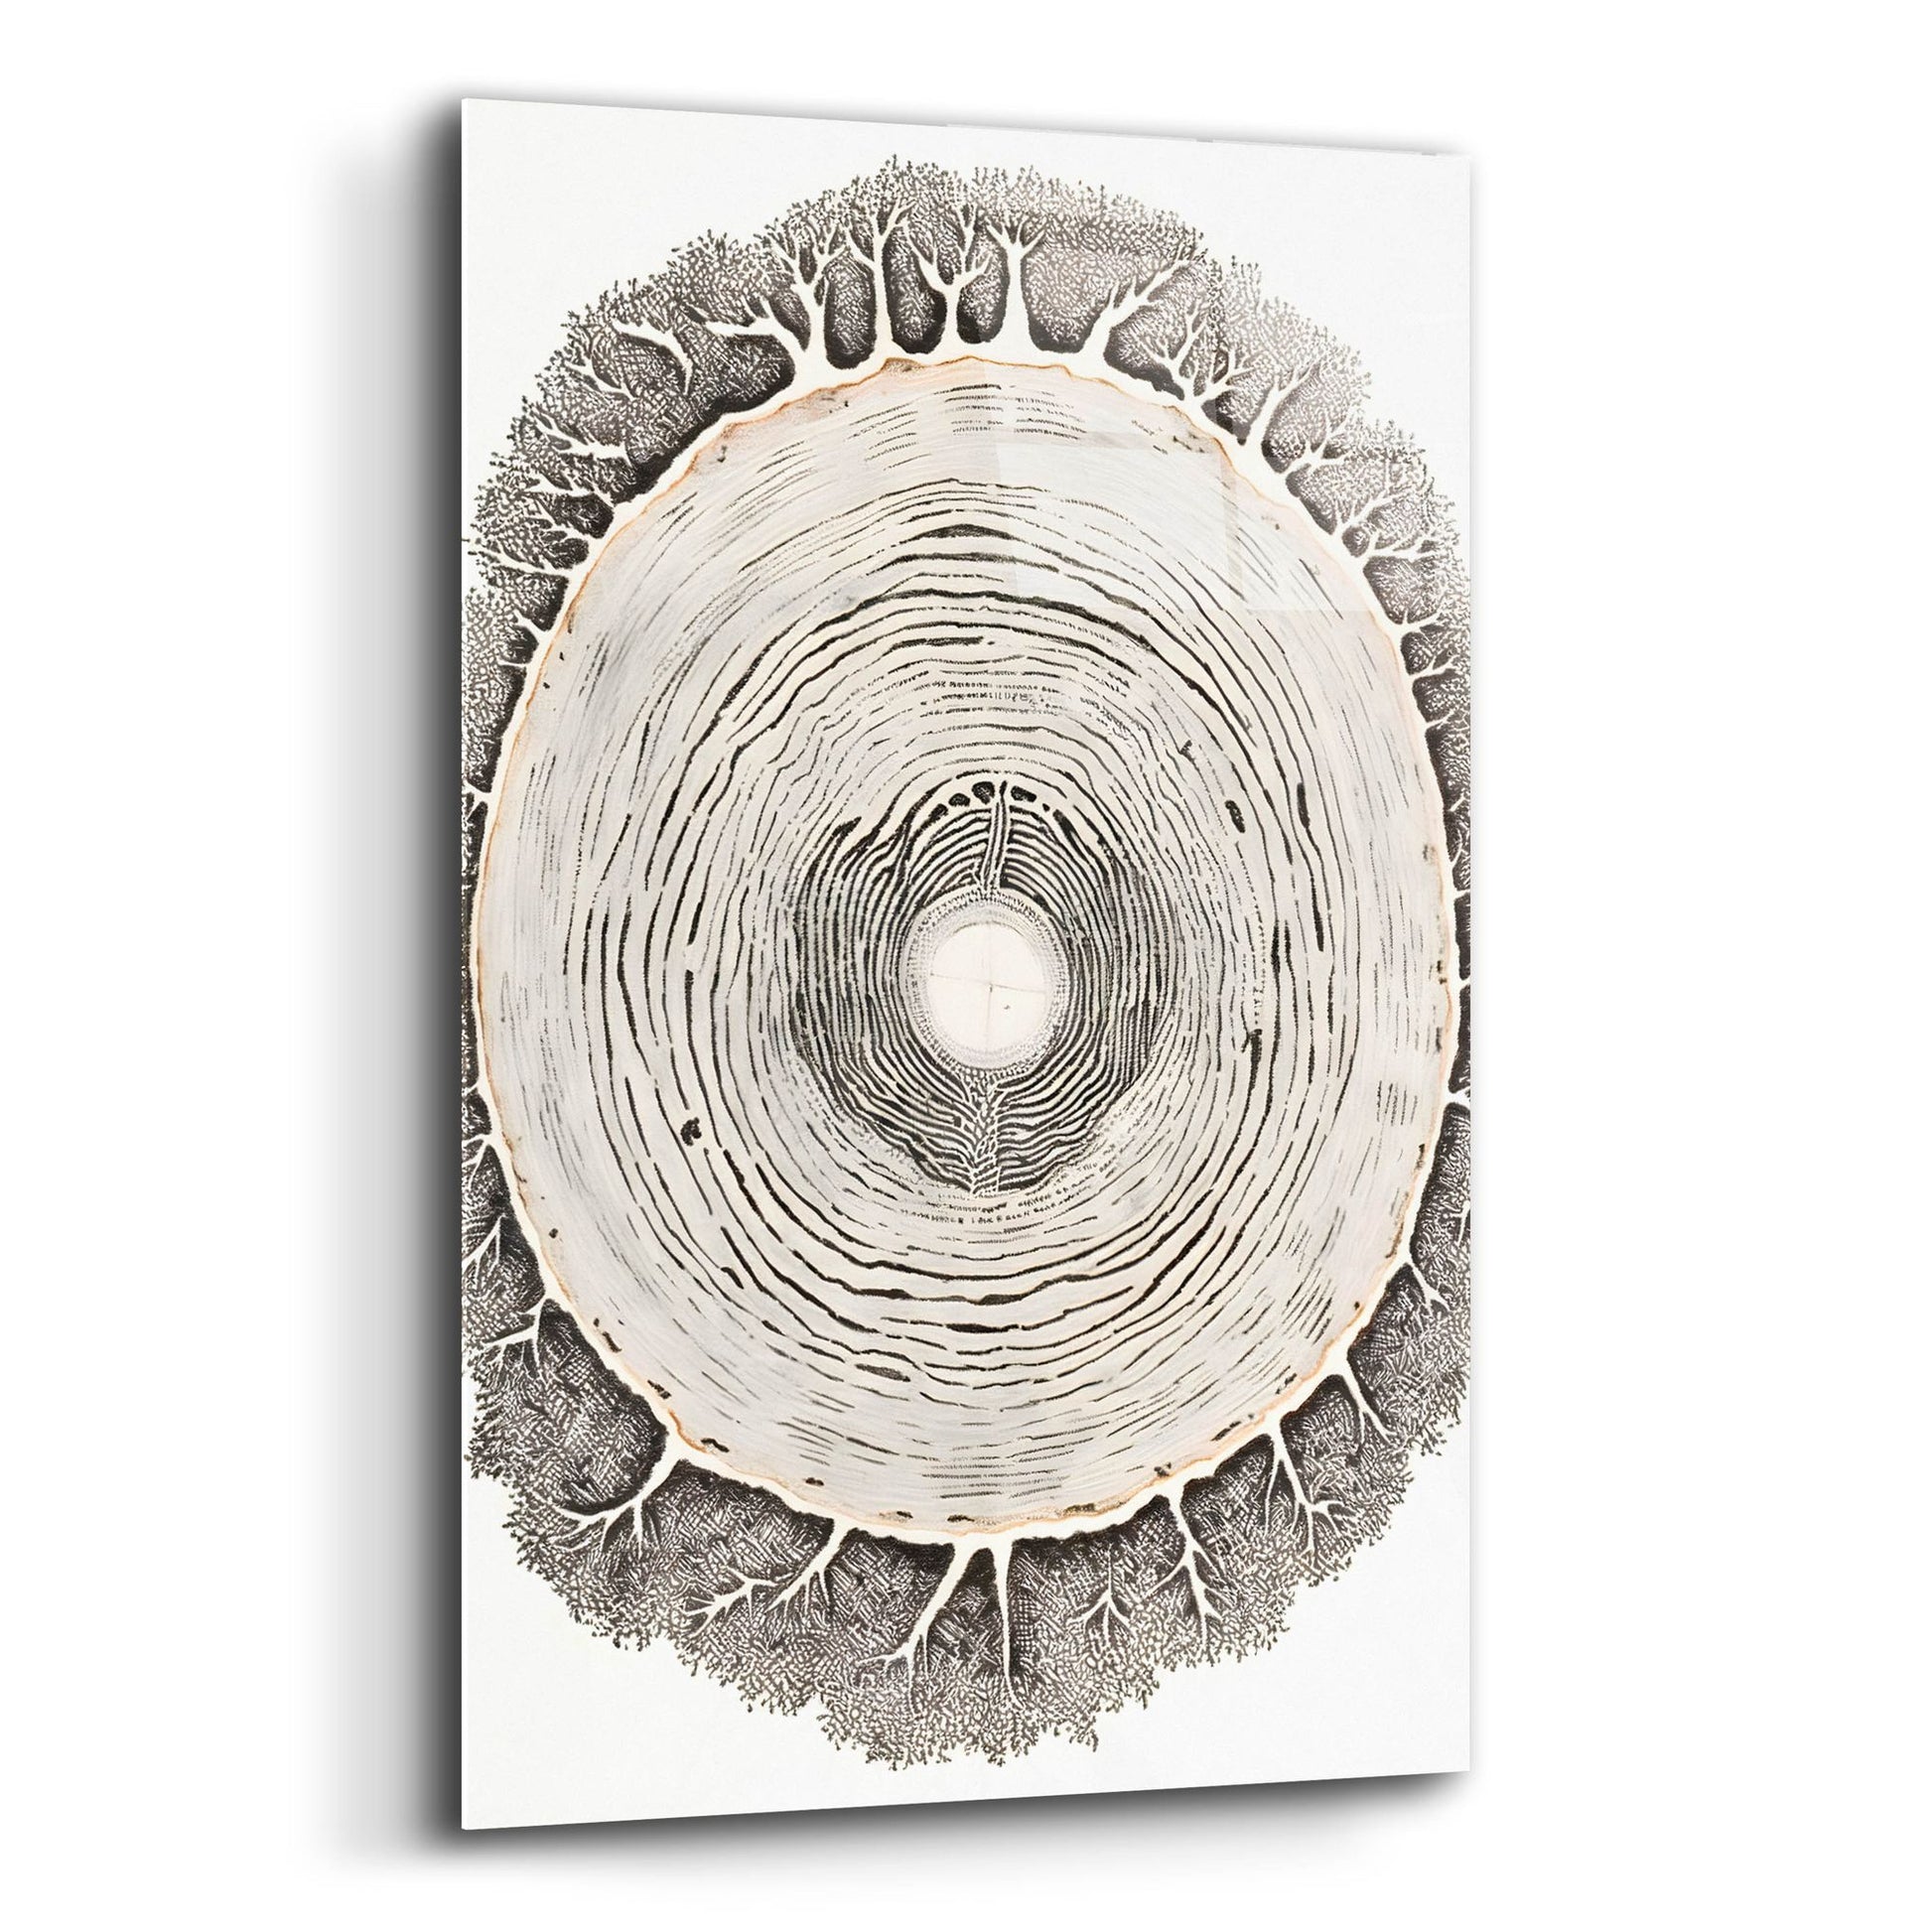 Epic Art 'Nature Inspired 1' by Petals Prints Design, Acrylic Glass Wall Art,12x16